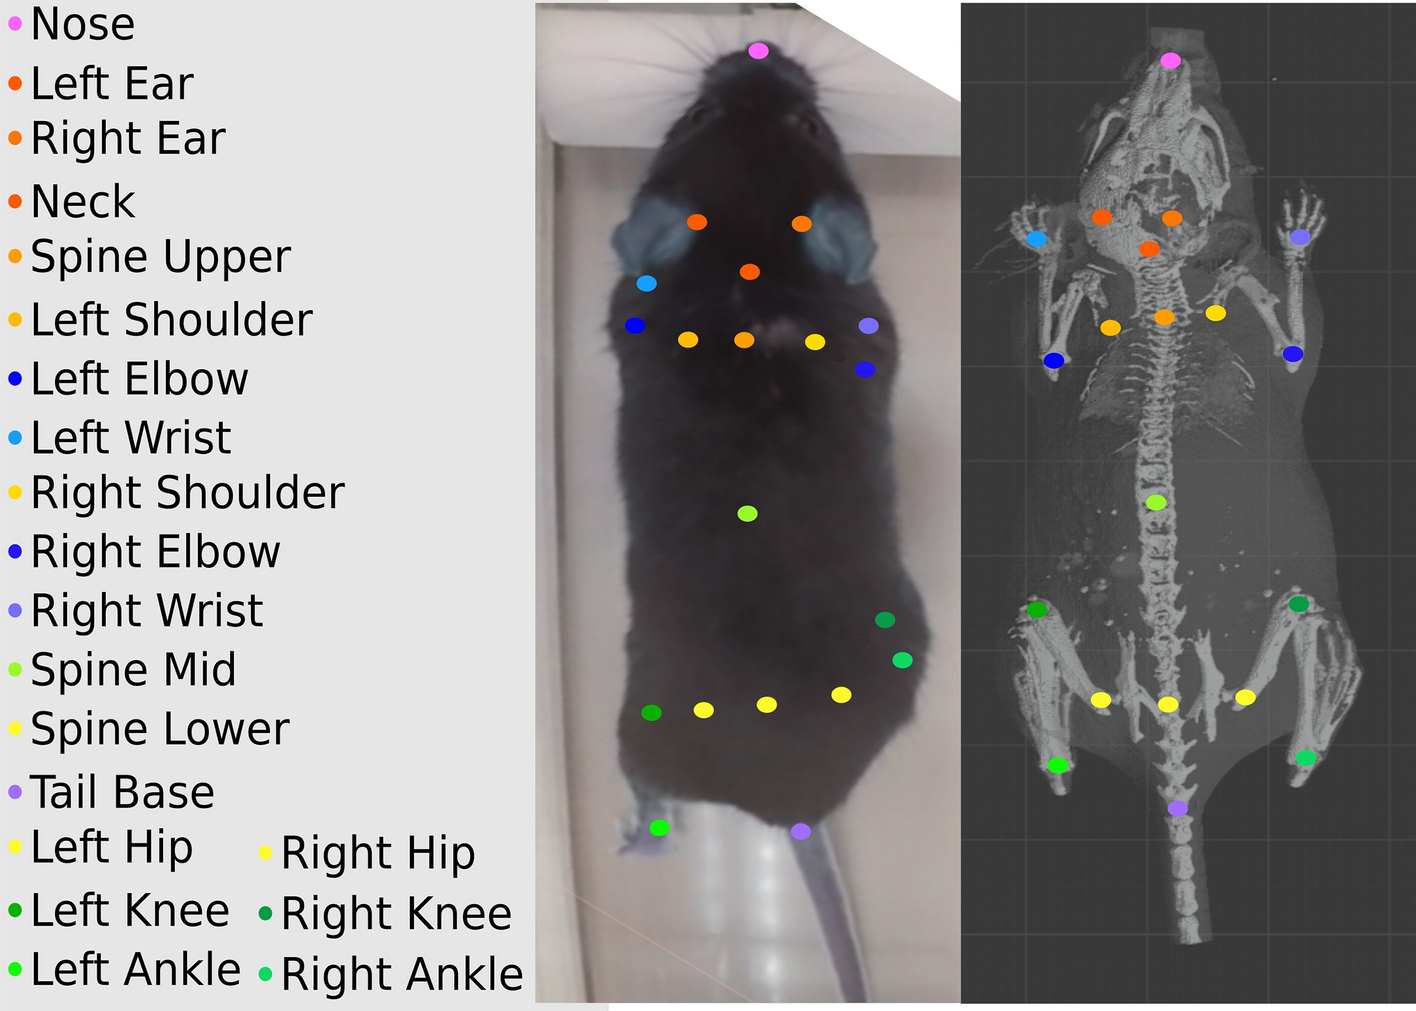 3D mouse pose from single-view video and a new dataset